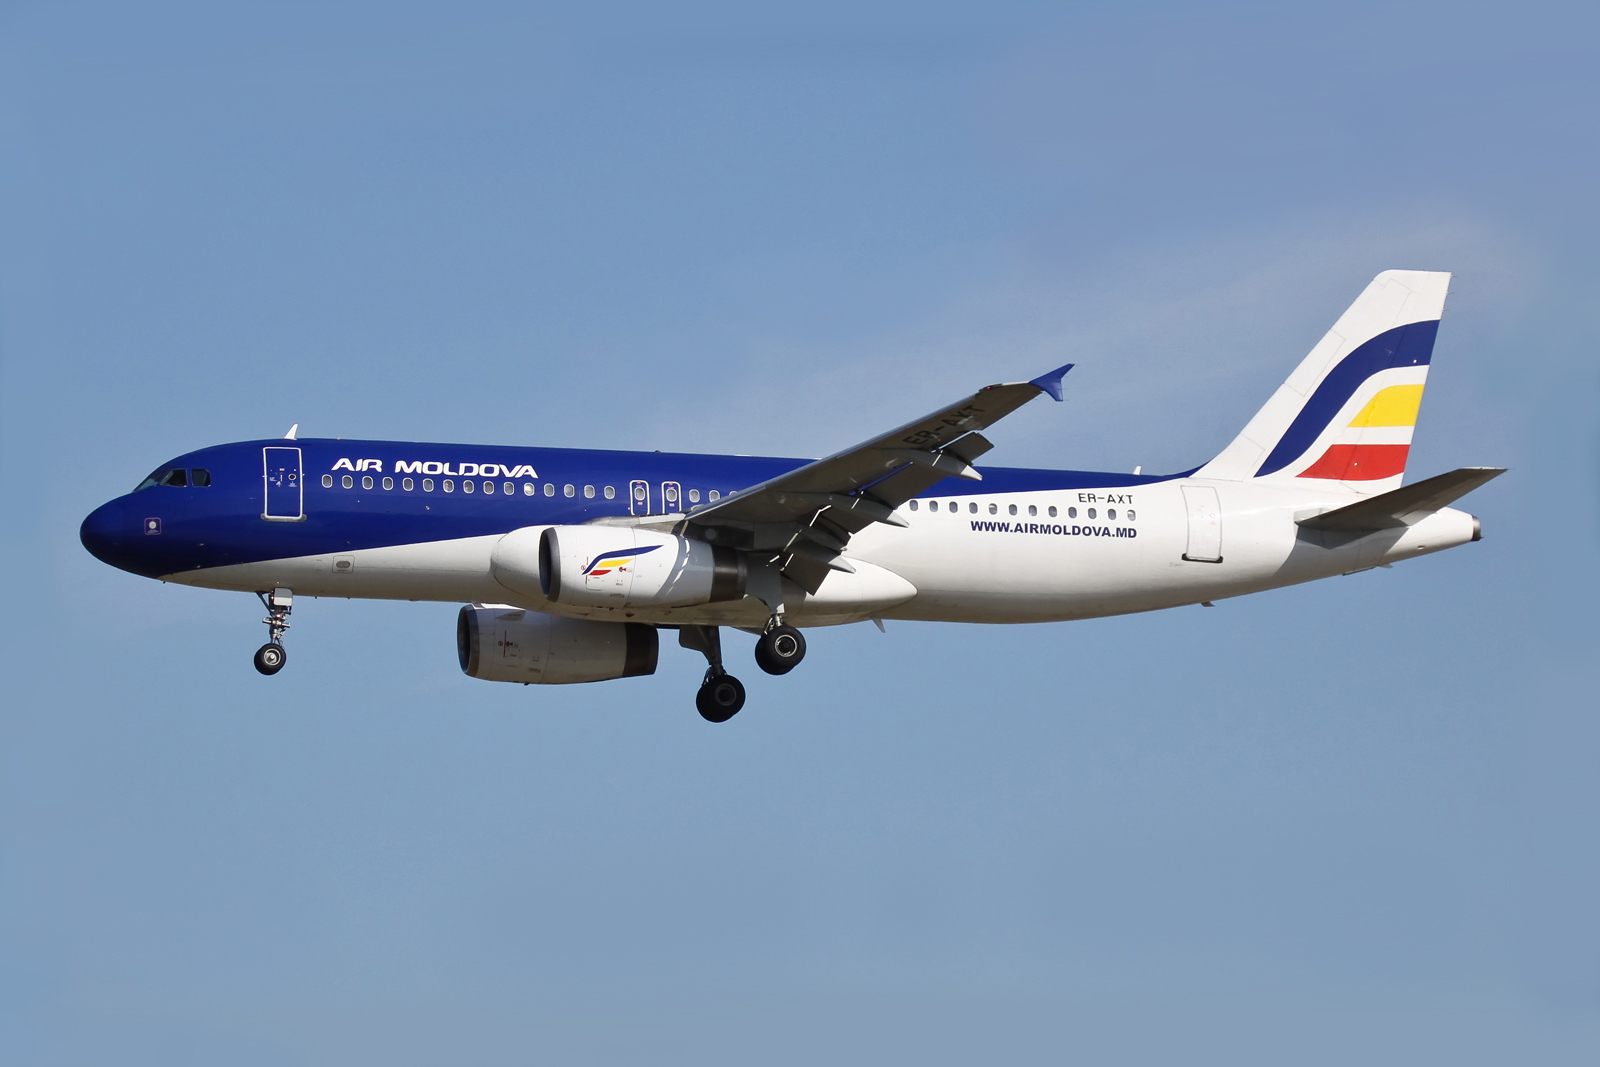 A Journey Through Air Moldova: The Evolution of Moldova’s National Airline